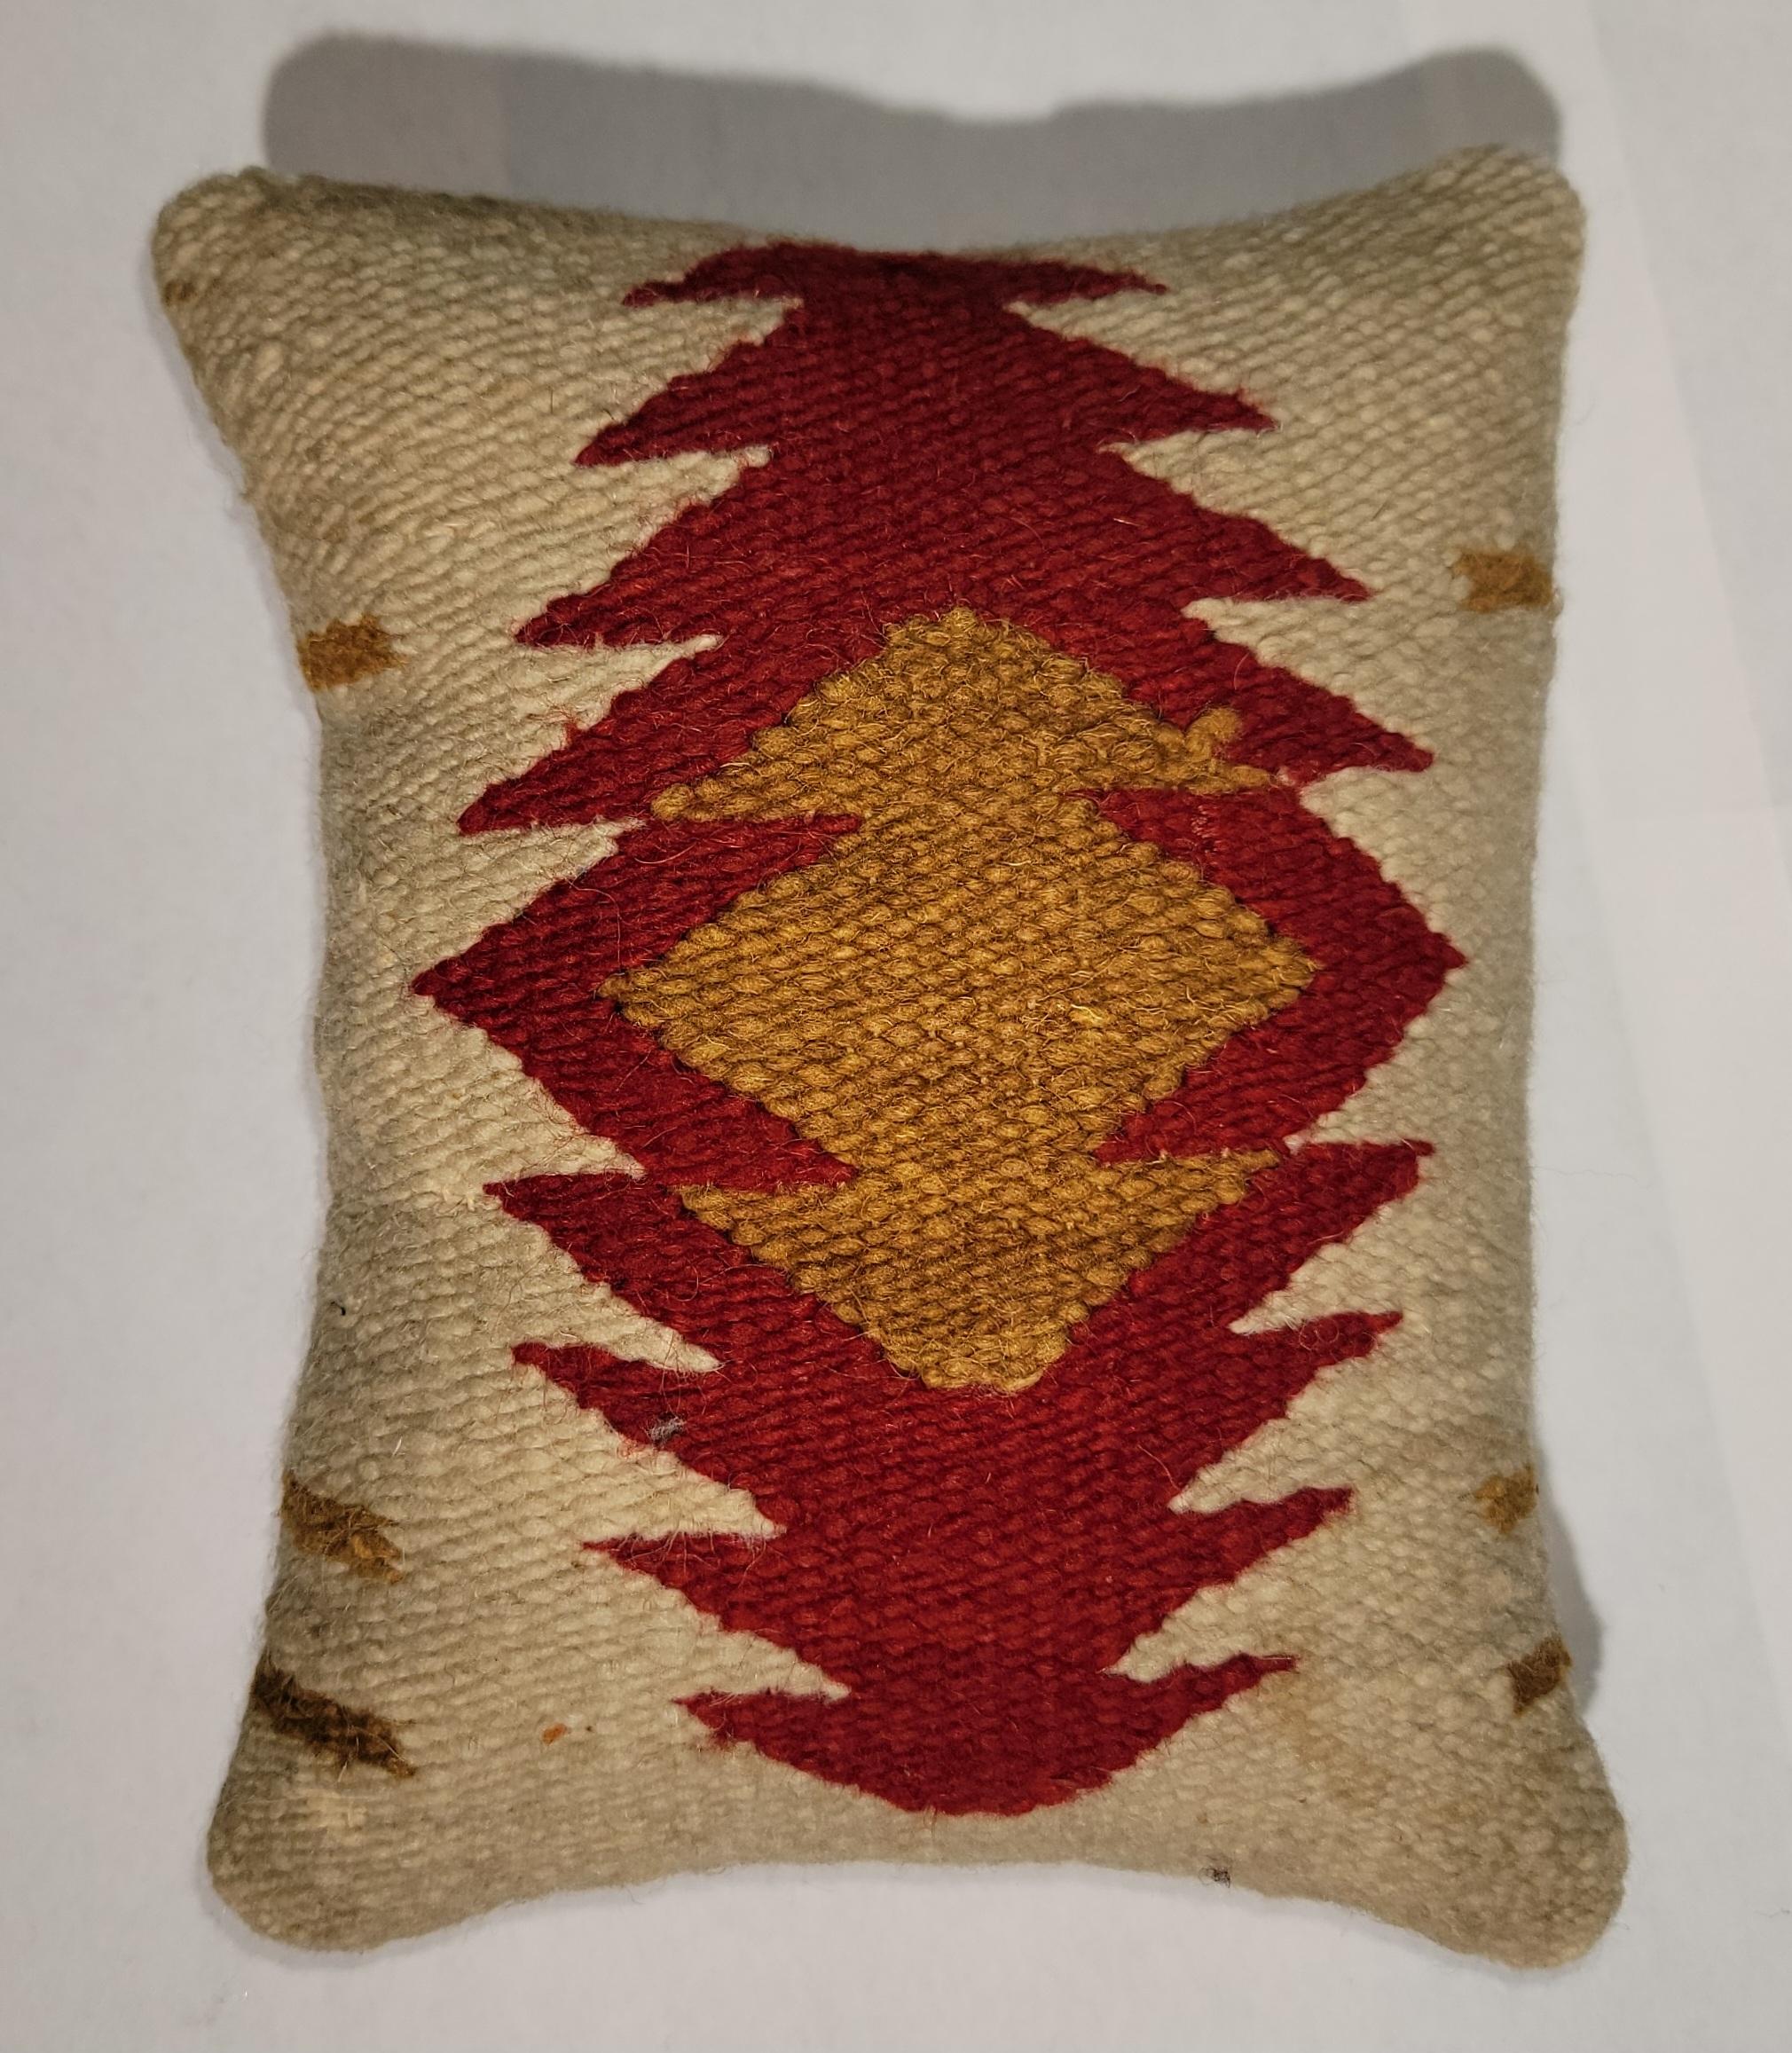 Early 20th Century Navajo sampler eye dazzler pillow with bright reds and yellow color. The backing is a linen backing, Custom made insert with down and feather. Small in stature but strong in its presentation. 